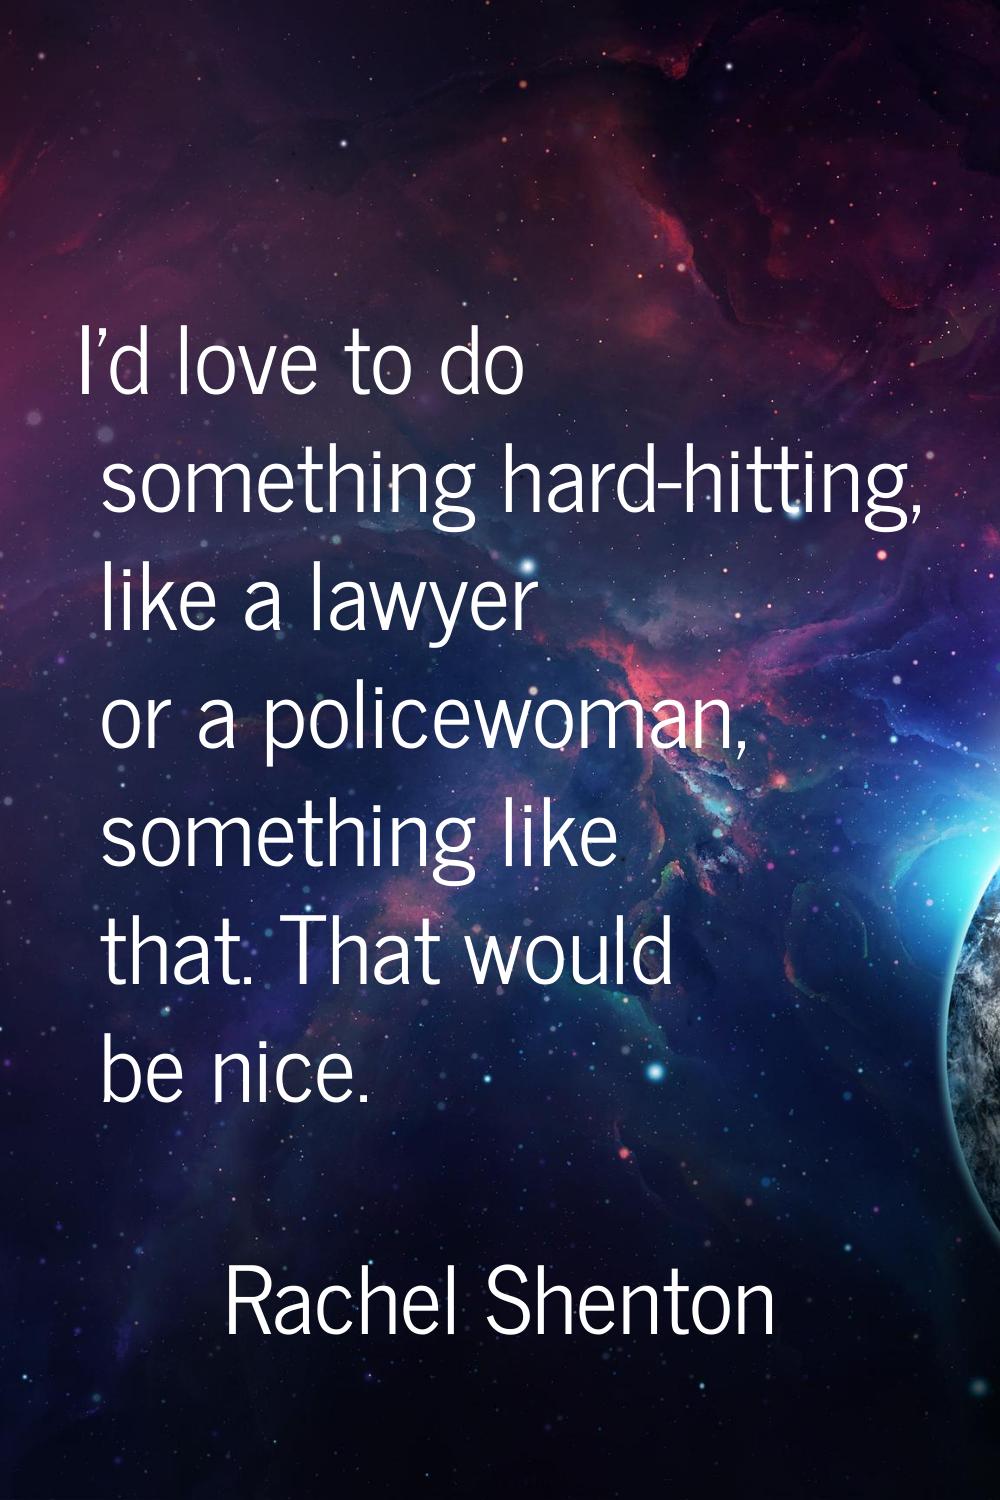 I'd love to do something hard-hitting, like a lawyer or a policewoman, something like that. That wo